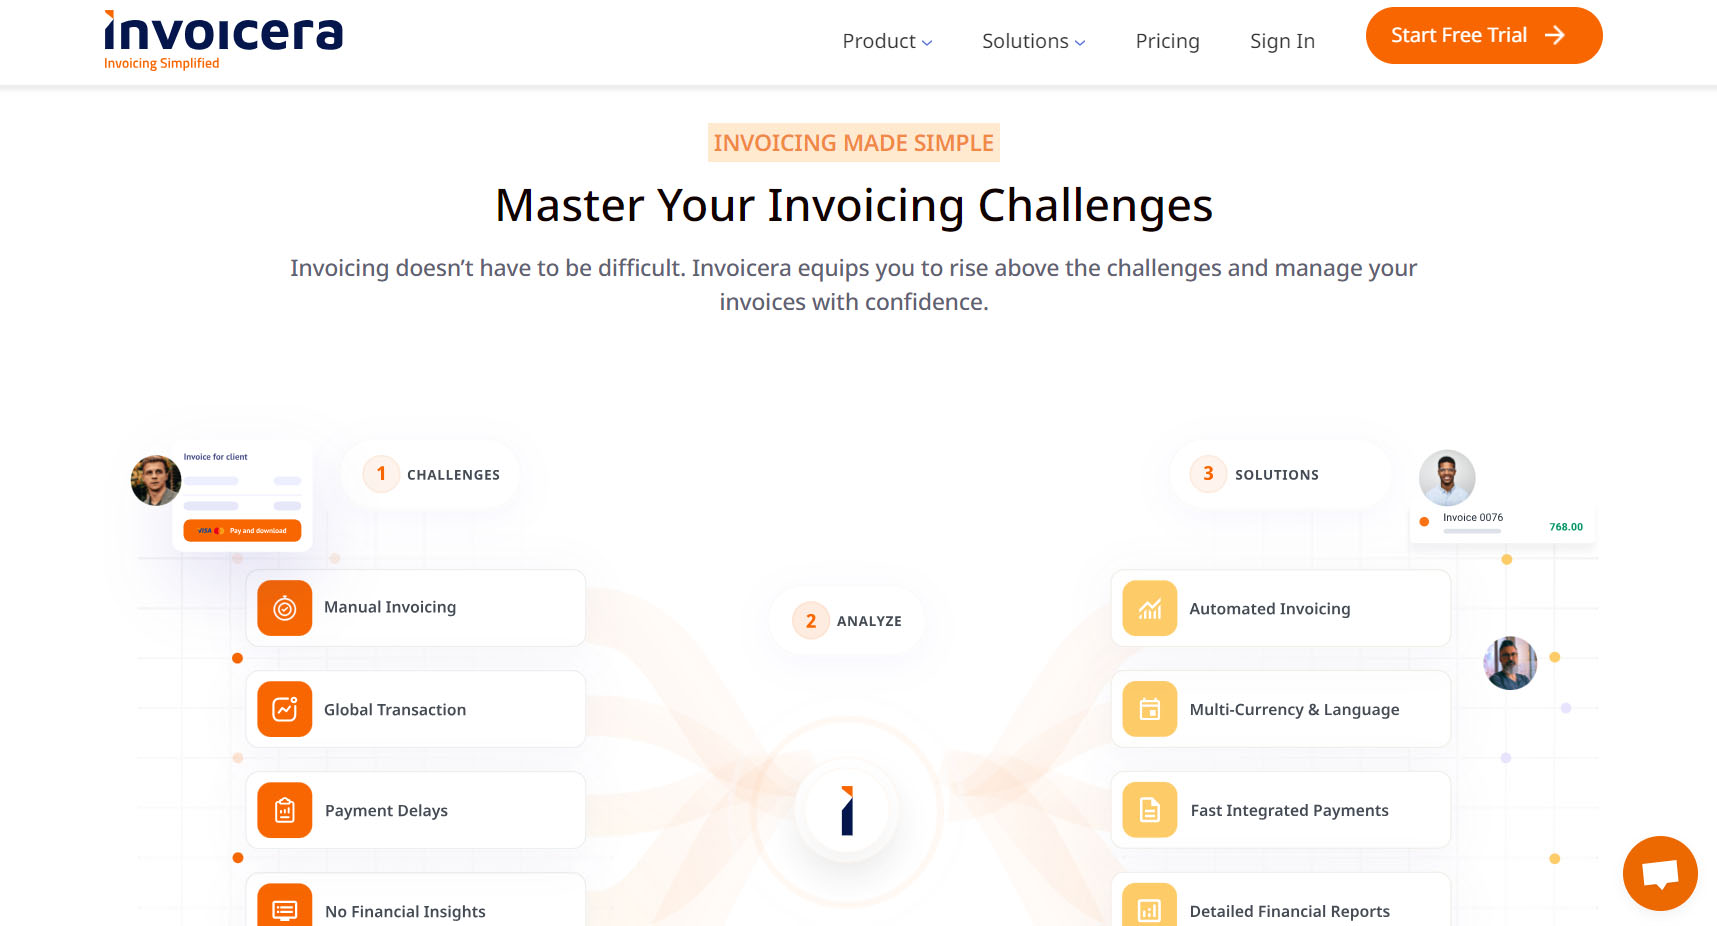 Invoicera Billing Software Review: Who Invoicera Billing Software Is Best For